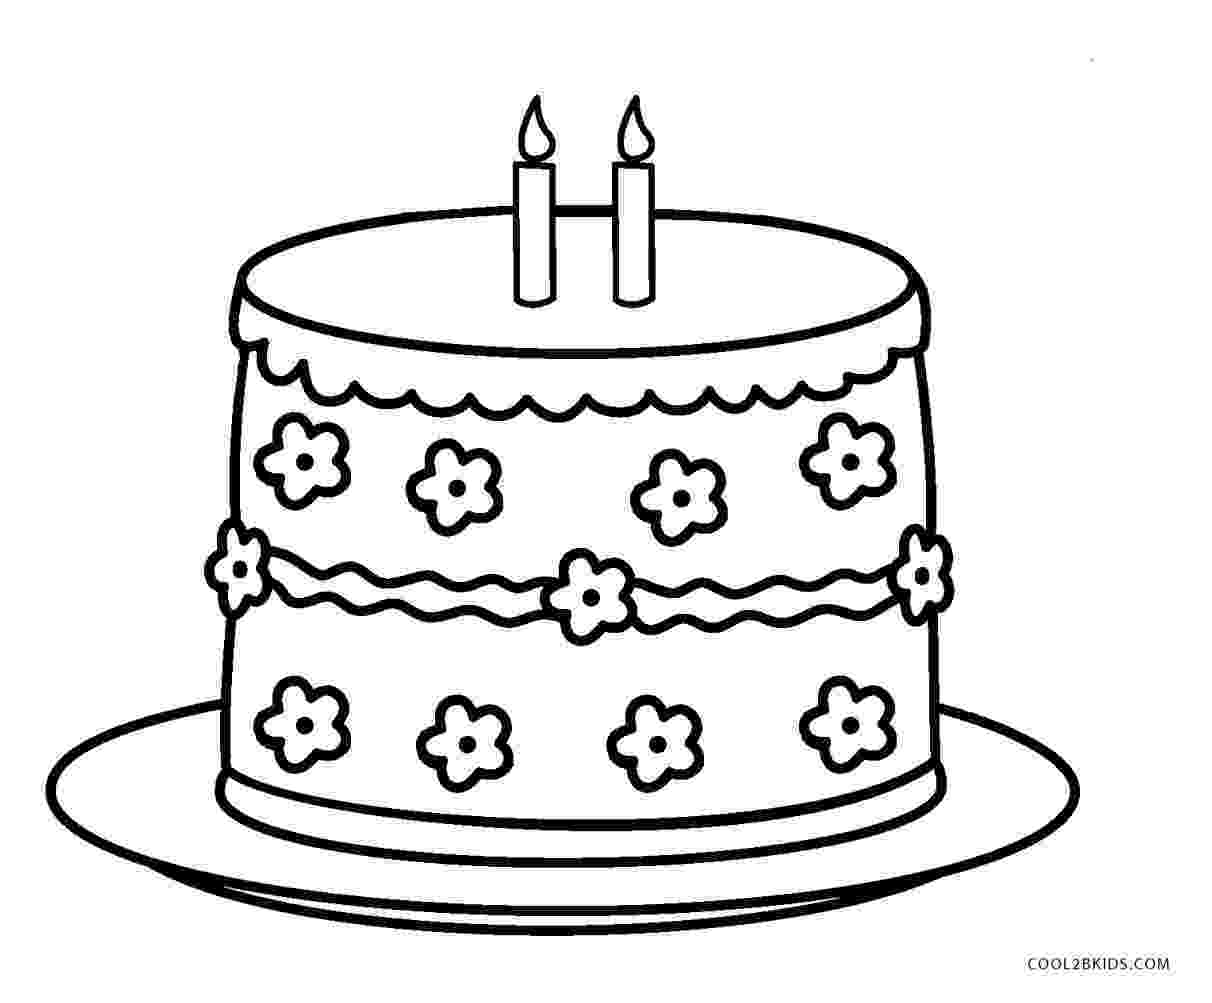 colouring picture cake free printable birthday cake coloring pages for kids colouring picture cake 